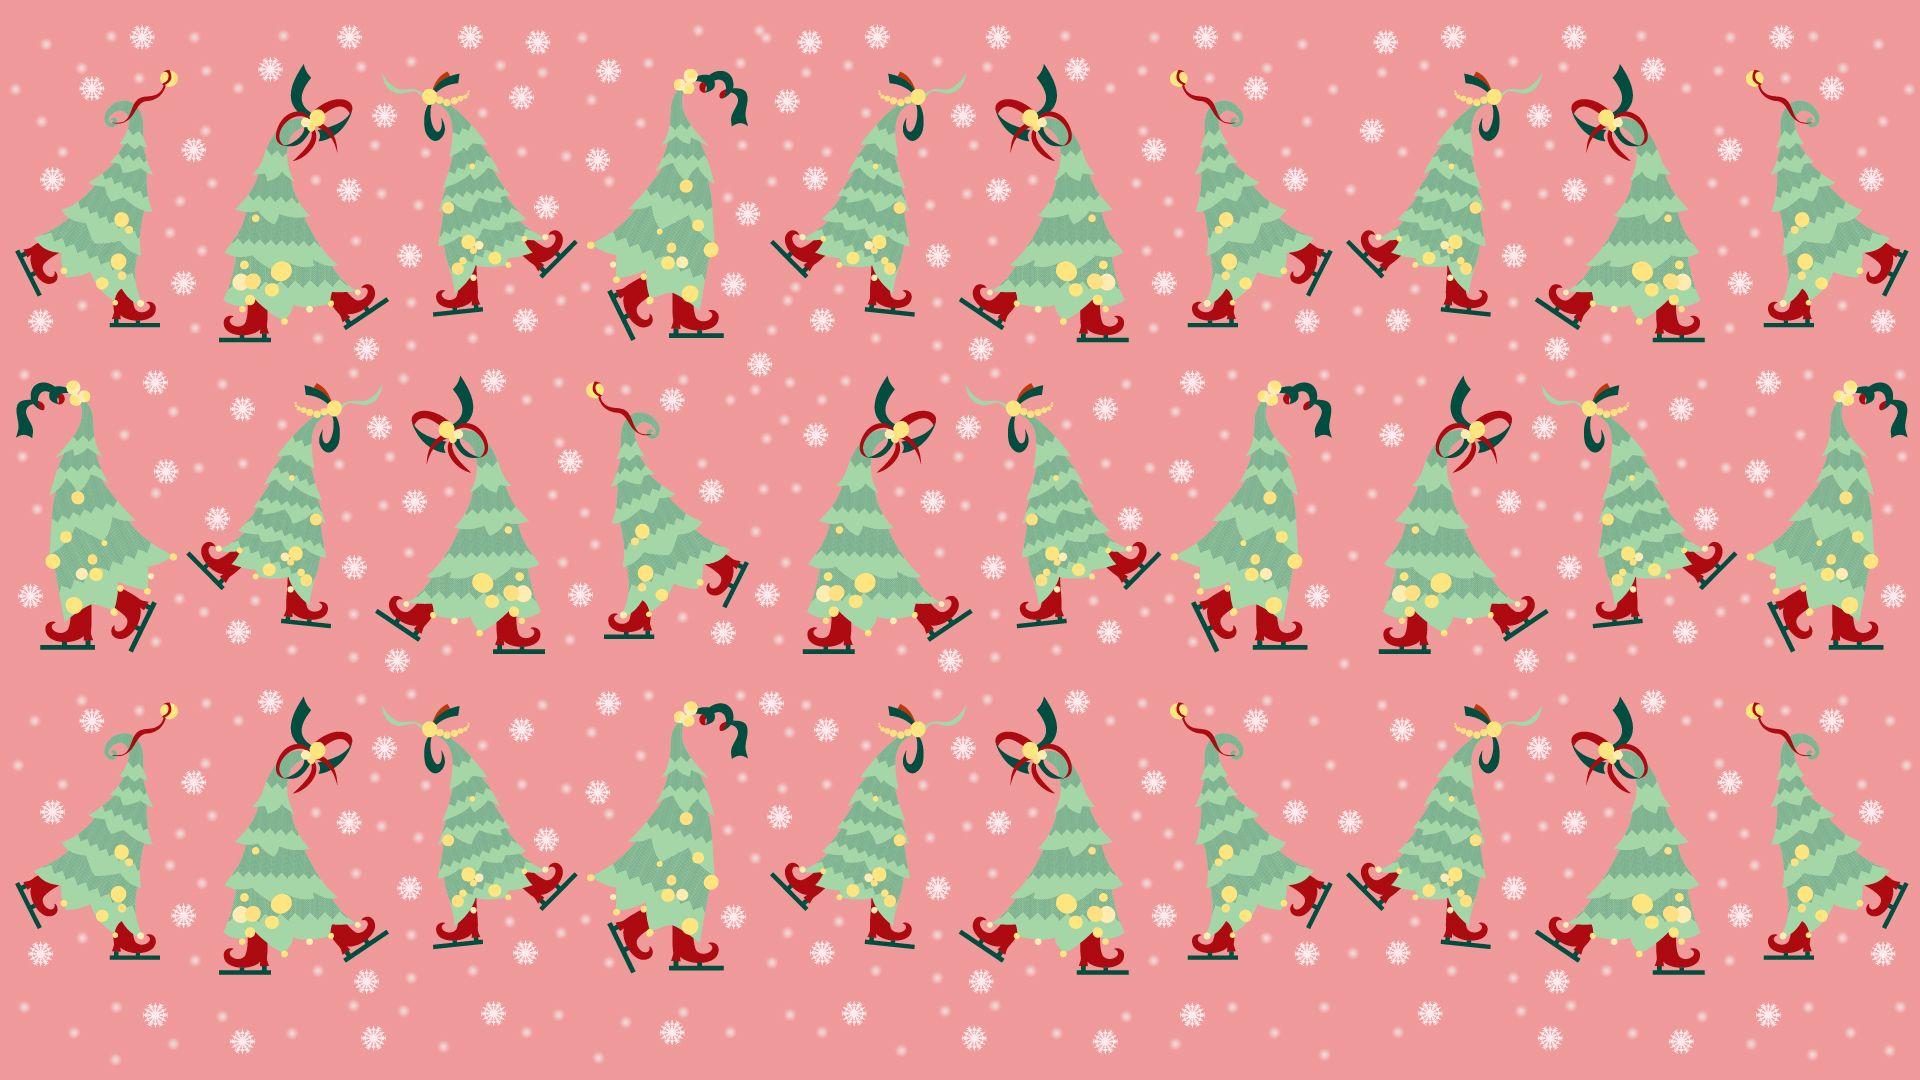 5 Free Cute Christmas Wallpapers for Laptops and Devices